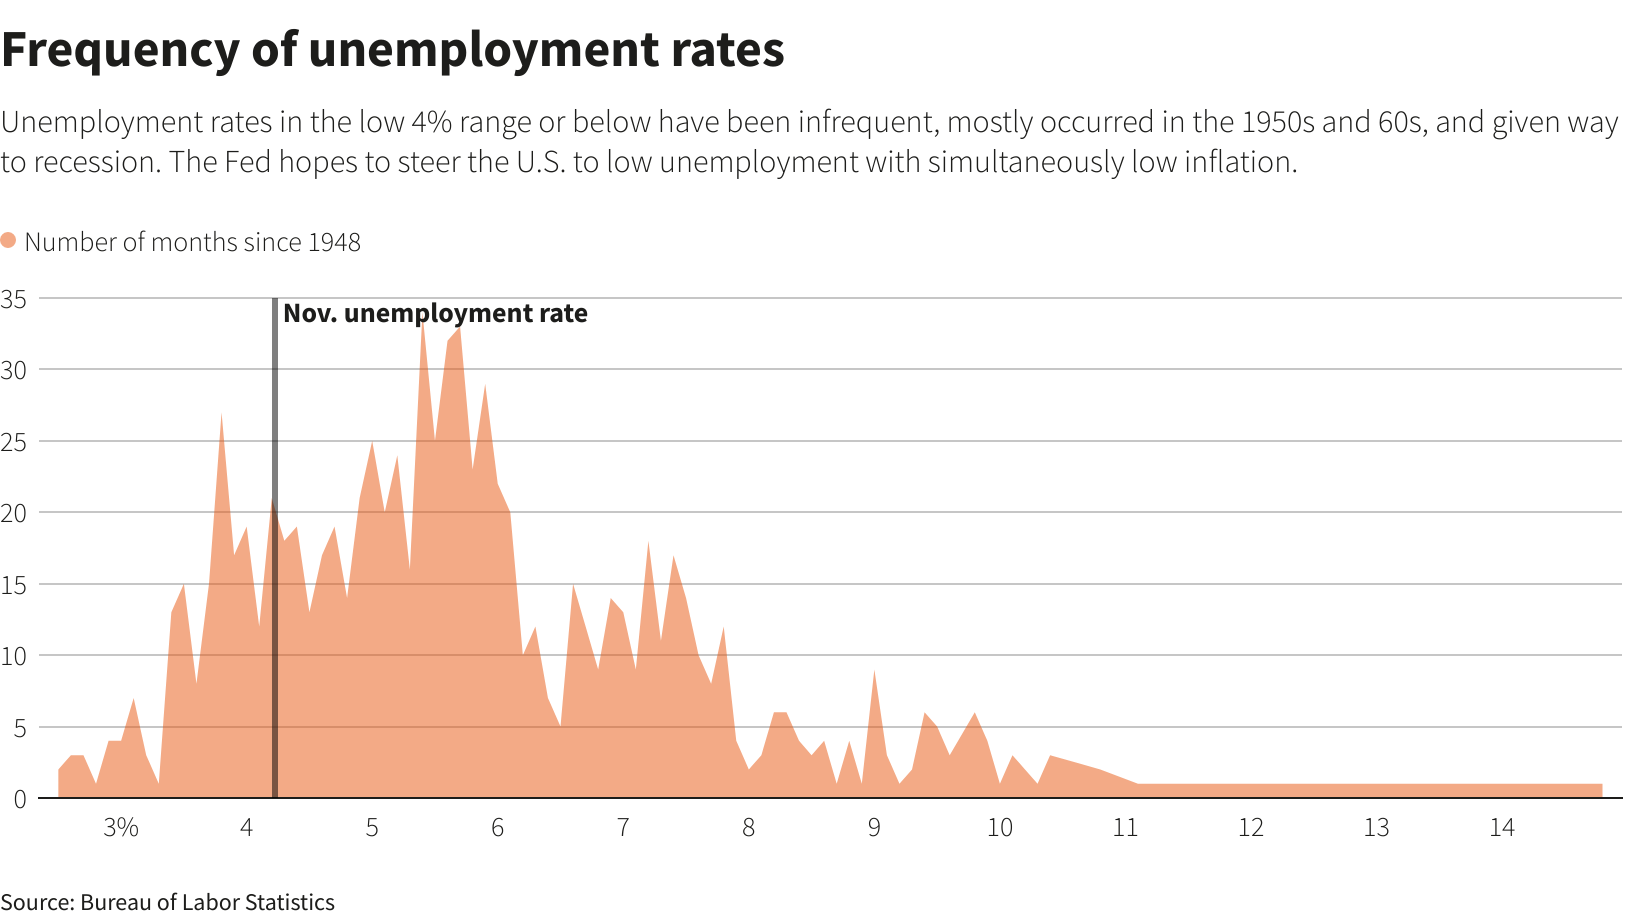 Frequency of unemployment rates